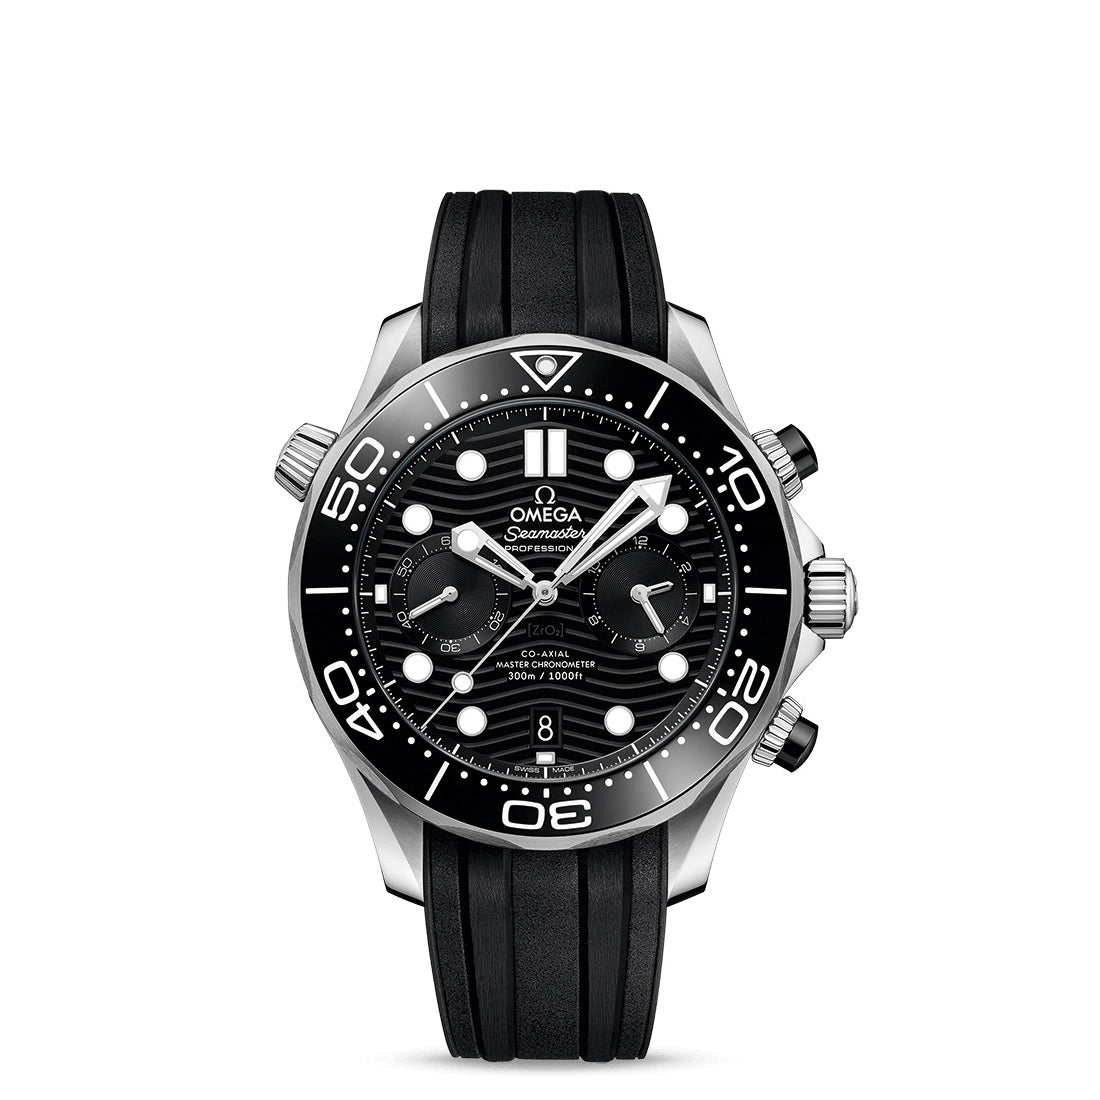 Omega Seamaster DIVER 300M CO‑AXIAL MASTER CHRONOMETER CHRONOGRAPH 44 MM 210.32.44.51.01.001